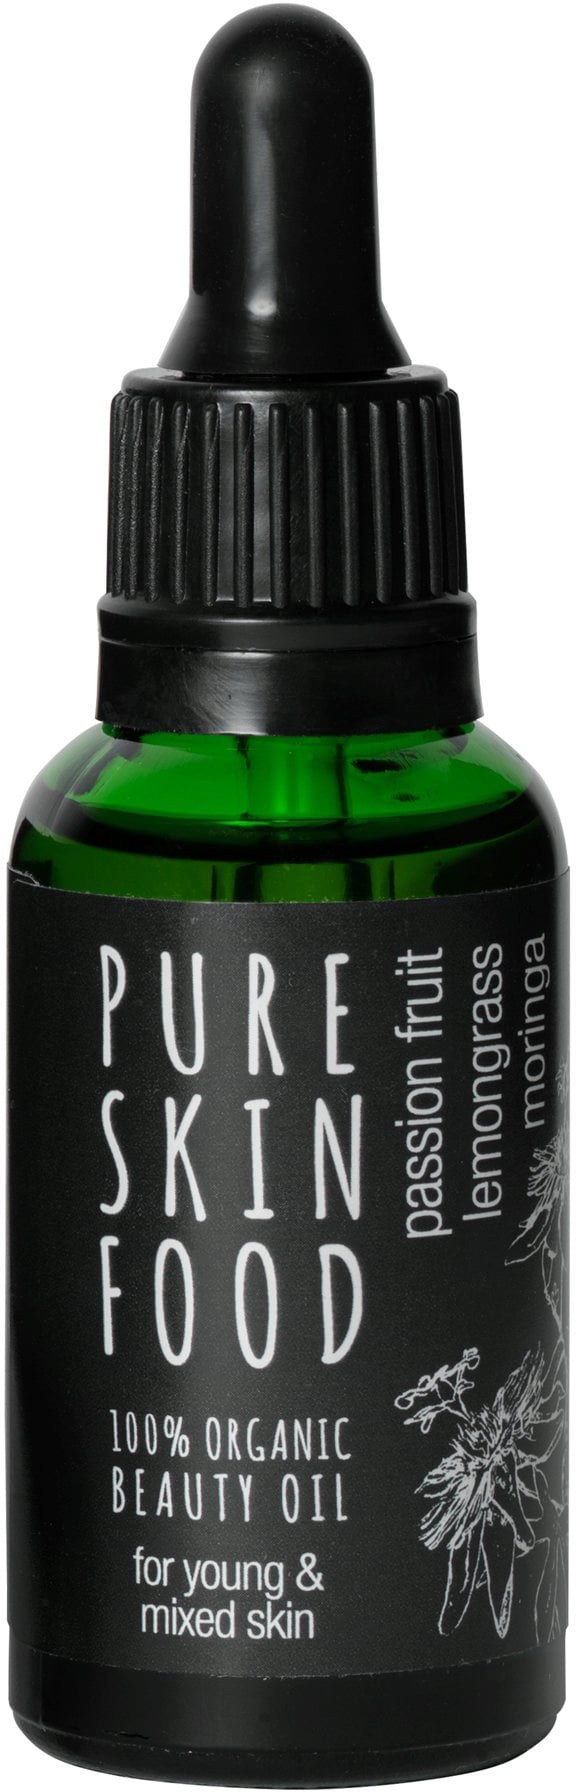 PURE SKIN FOOD Beauty Oil for young & mixed skin